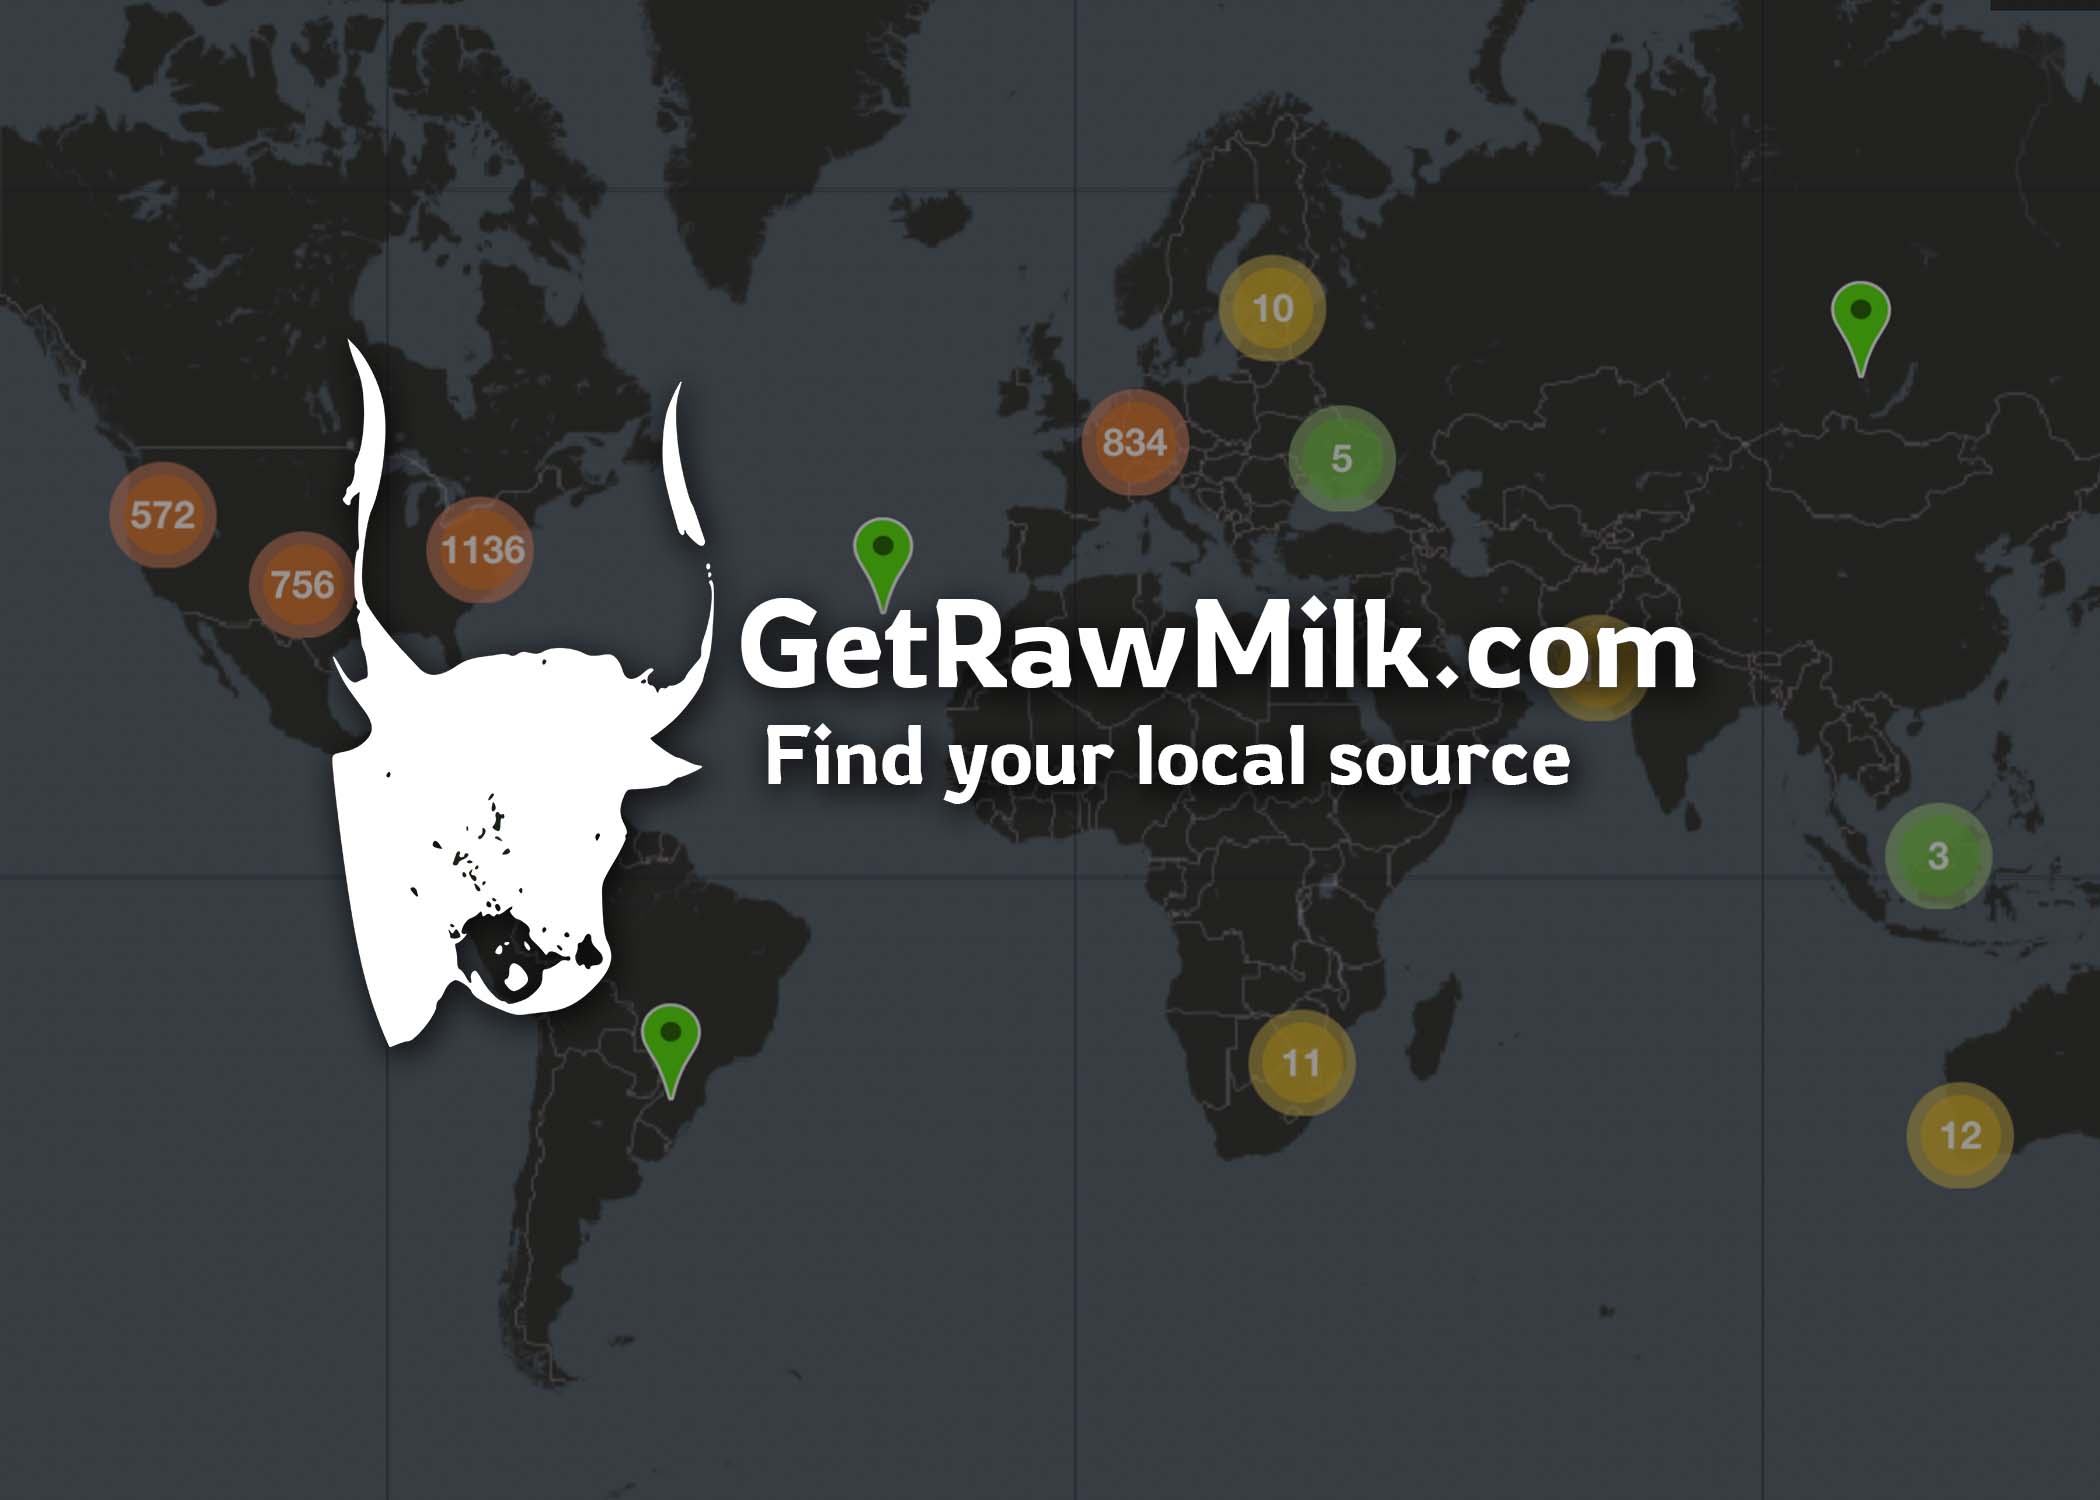 Raw Milk - You Can Find in a Retail Store